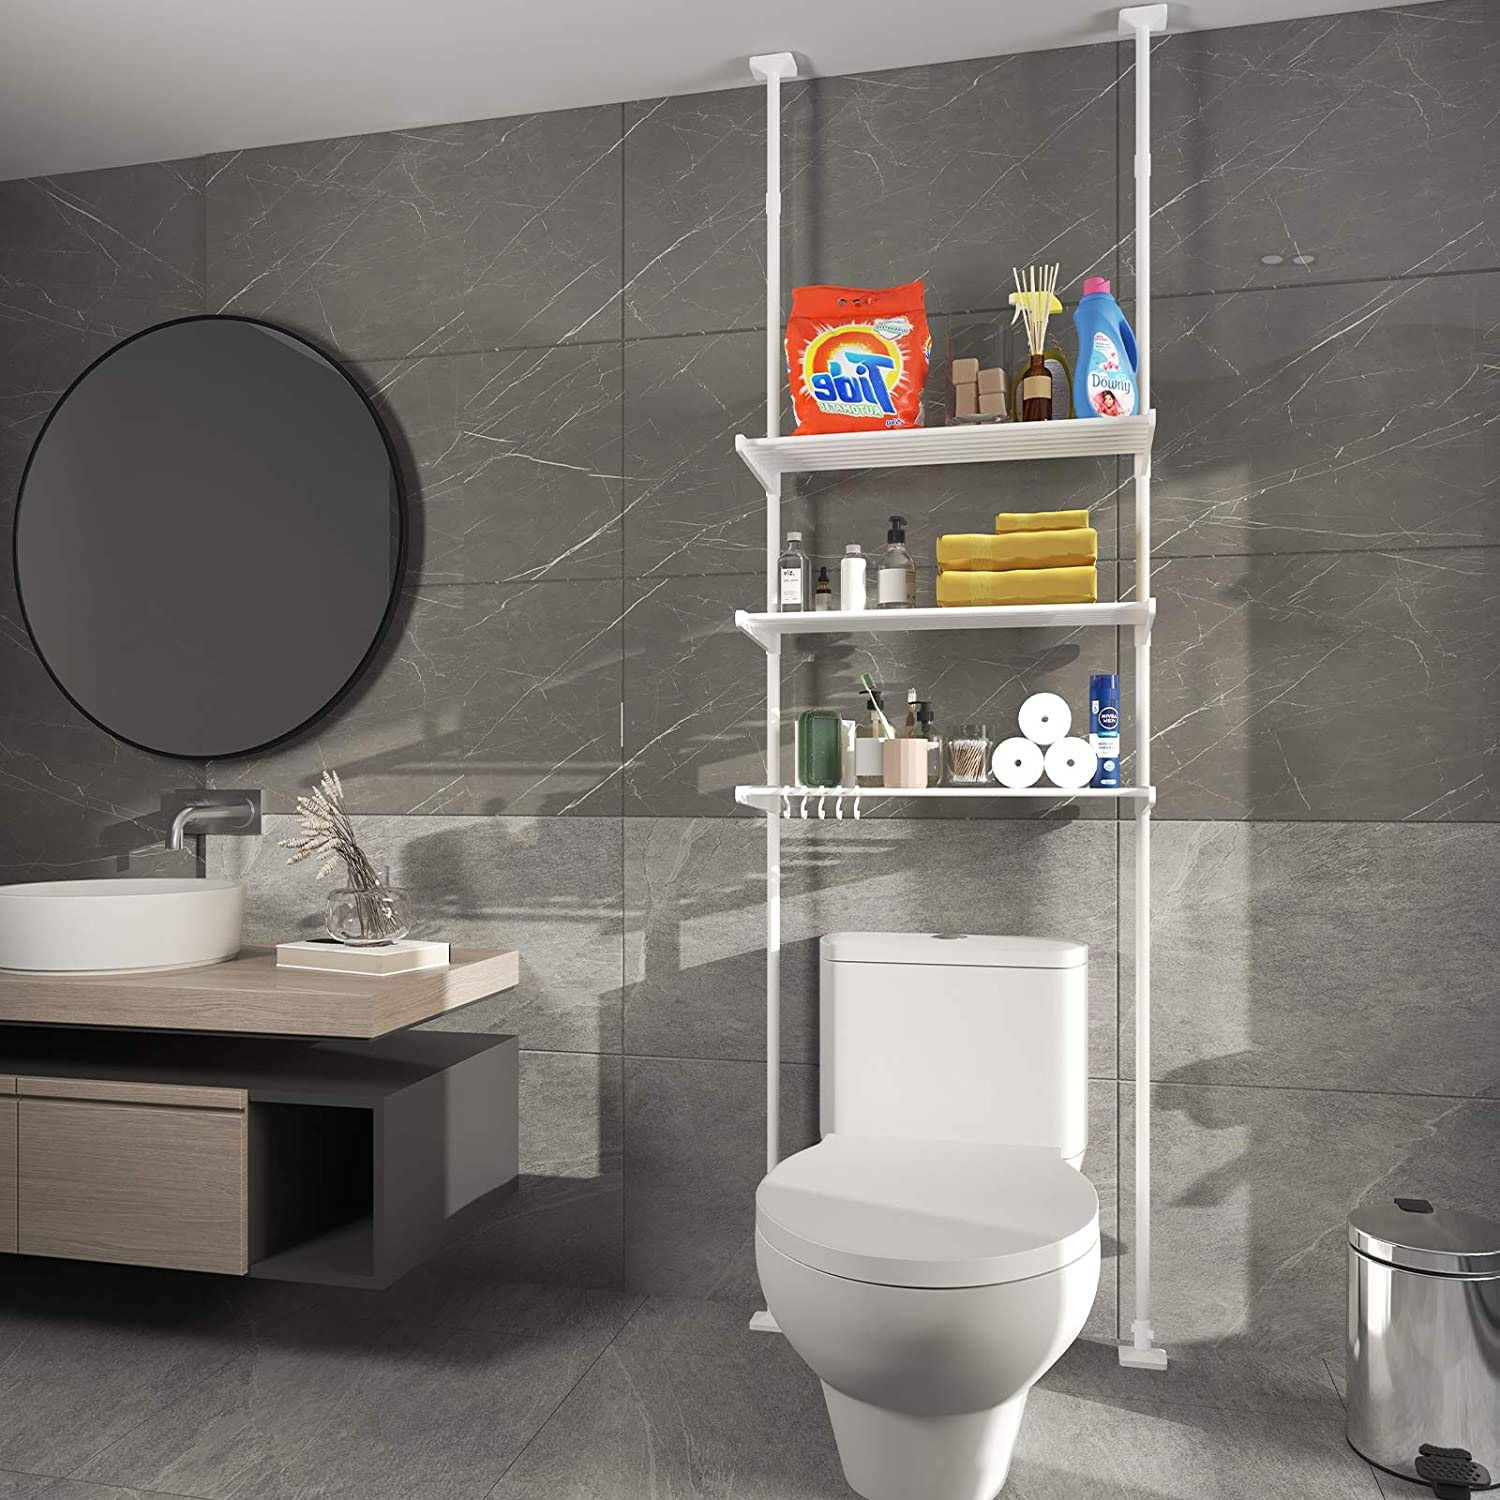 three-layer-adjustable-shelf-hooked-from-ceiling-to-wall-in-a-gray-tone-bathroom-with-round-mirror-12448.jpg